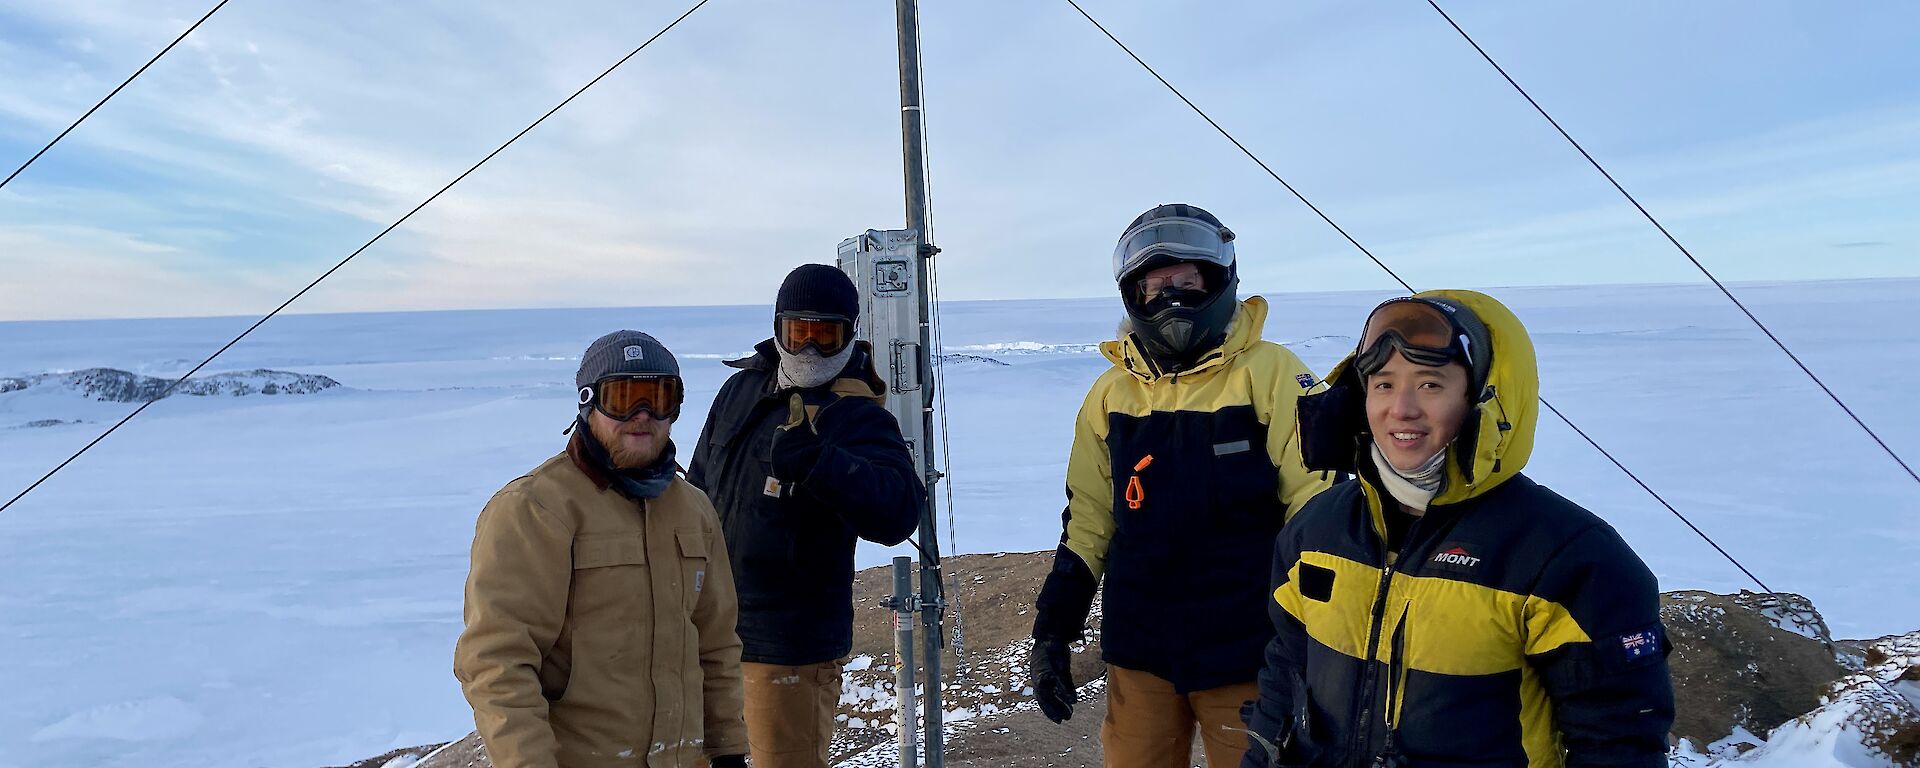 Casey winter expeditioners in a group photo in front an antenna in the snow